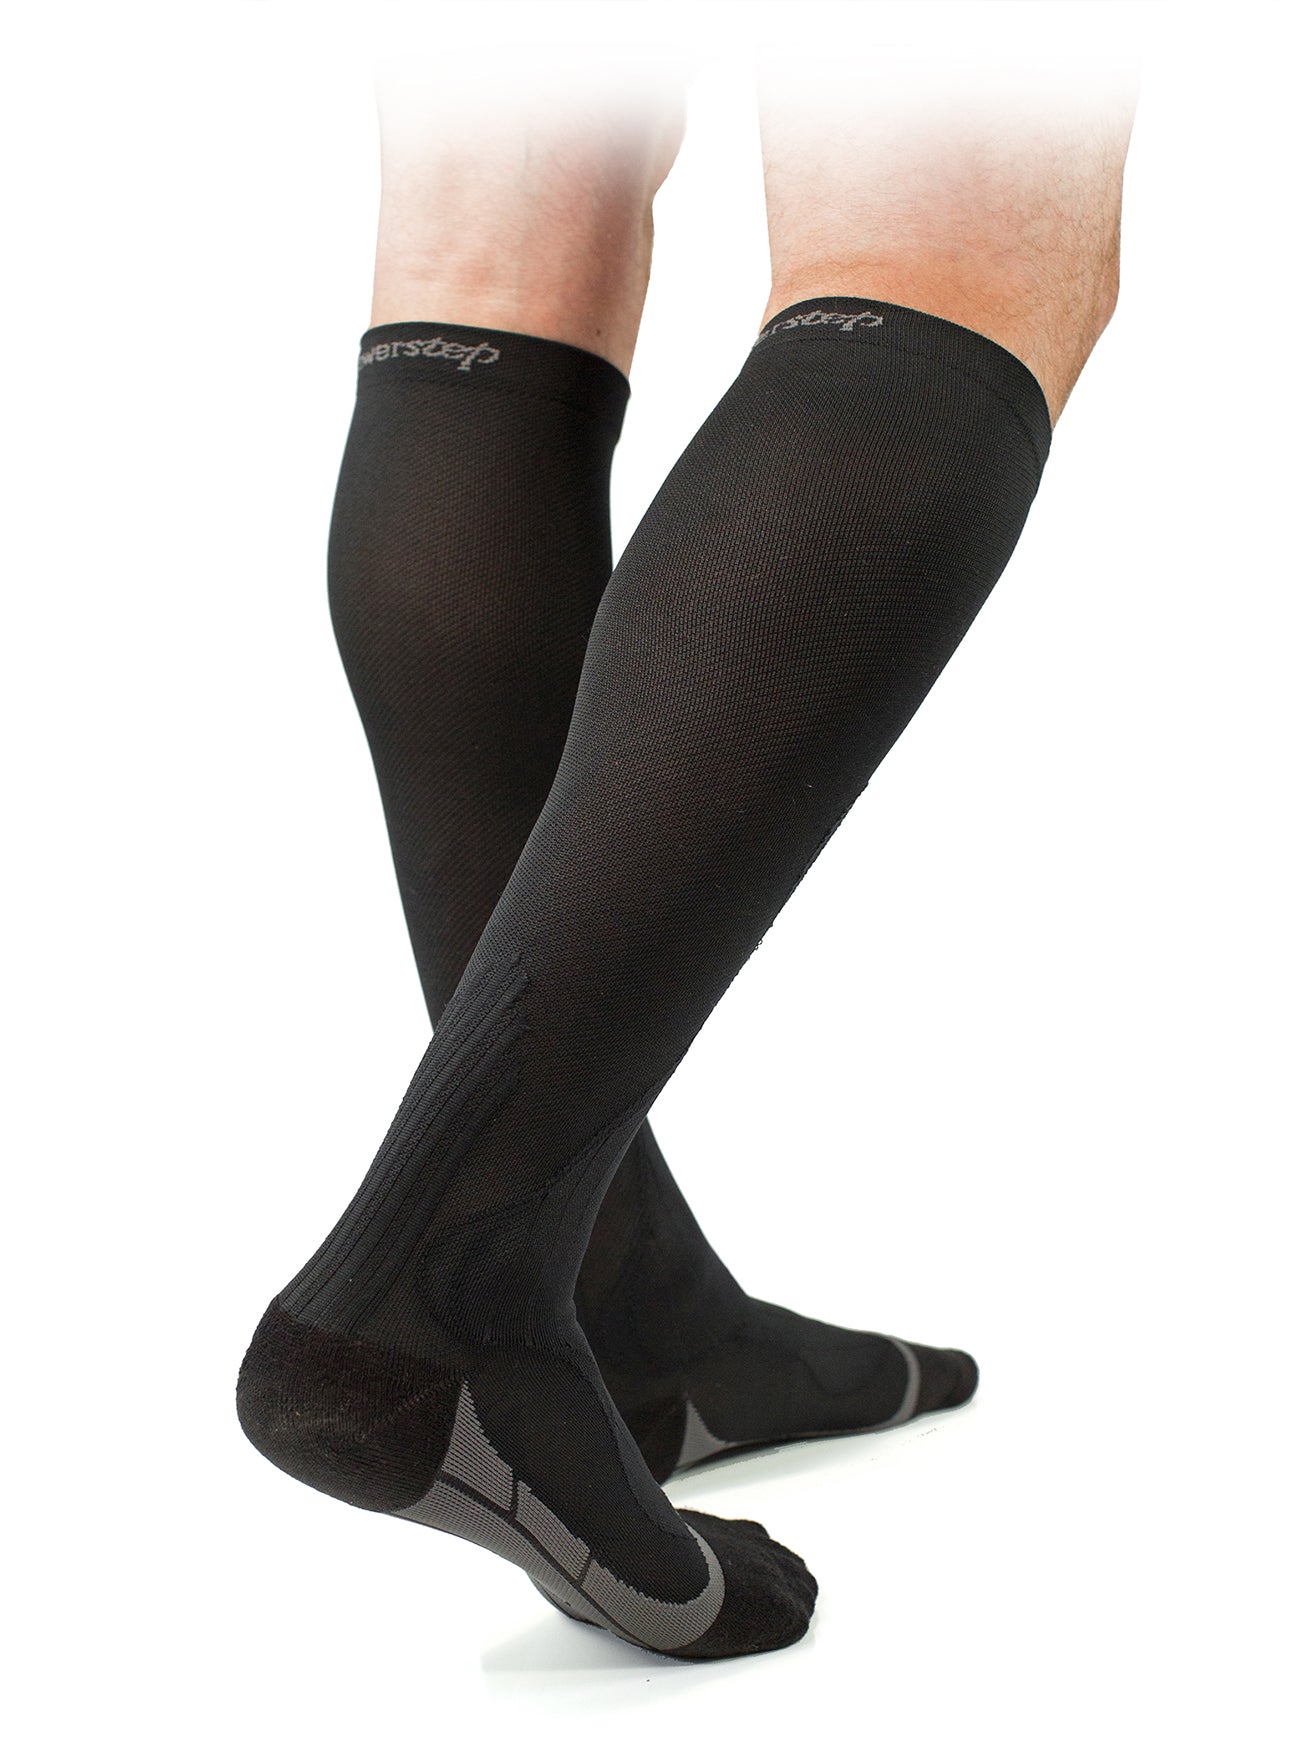 Powerstep G2 Compression Socks - Black and Gray Small : Men's 7 & Under